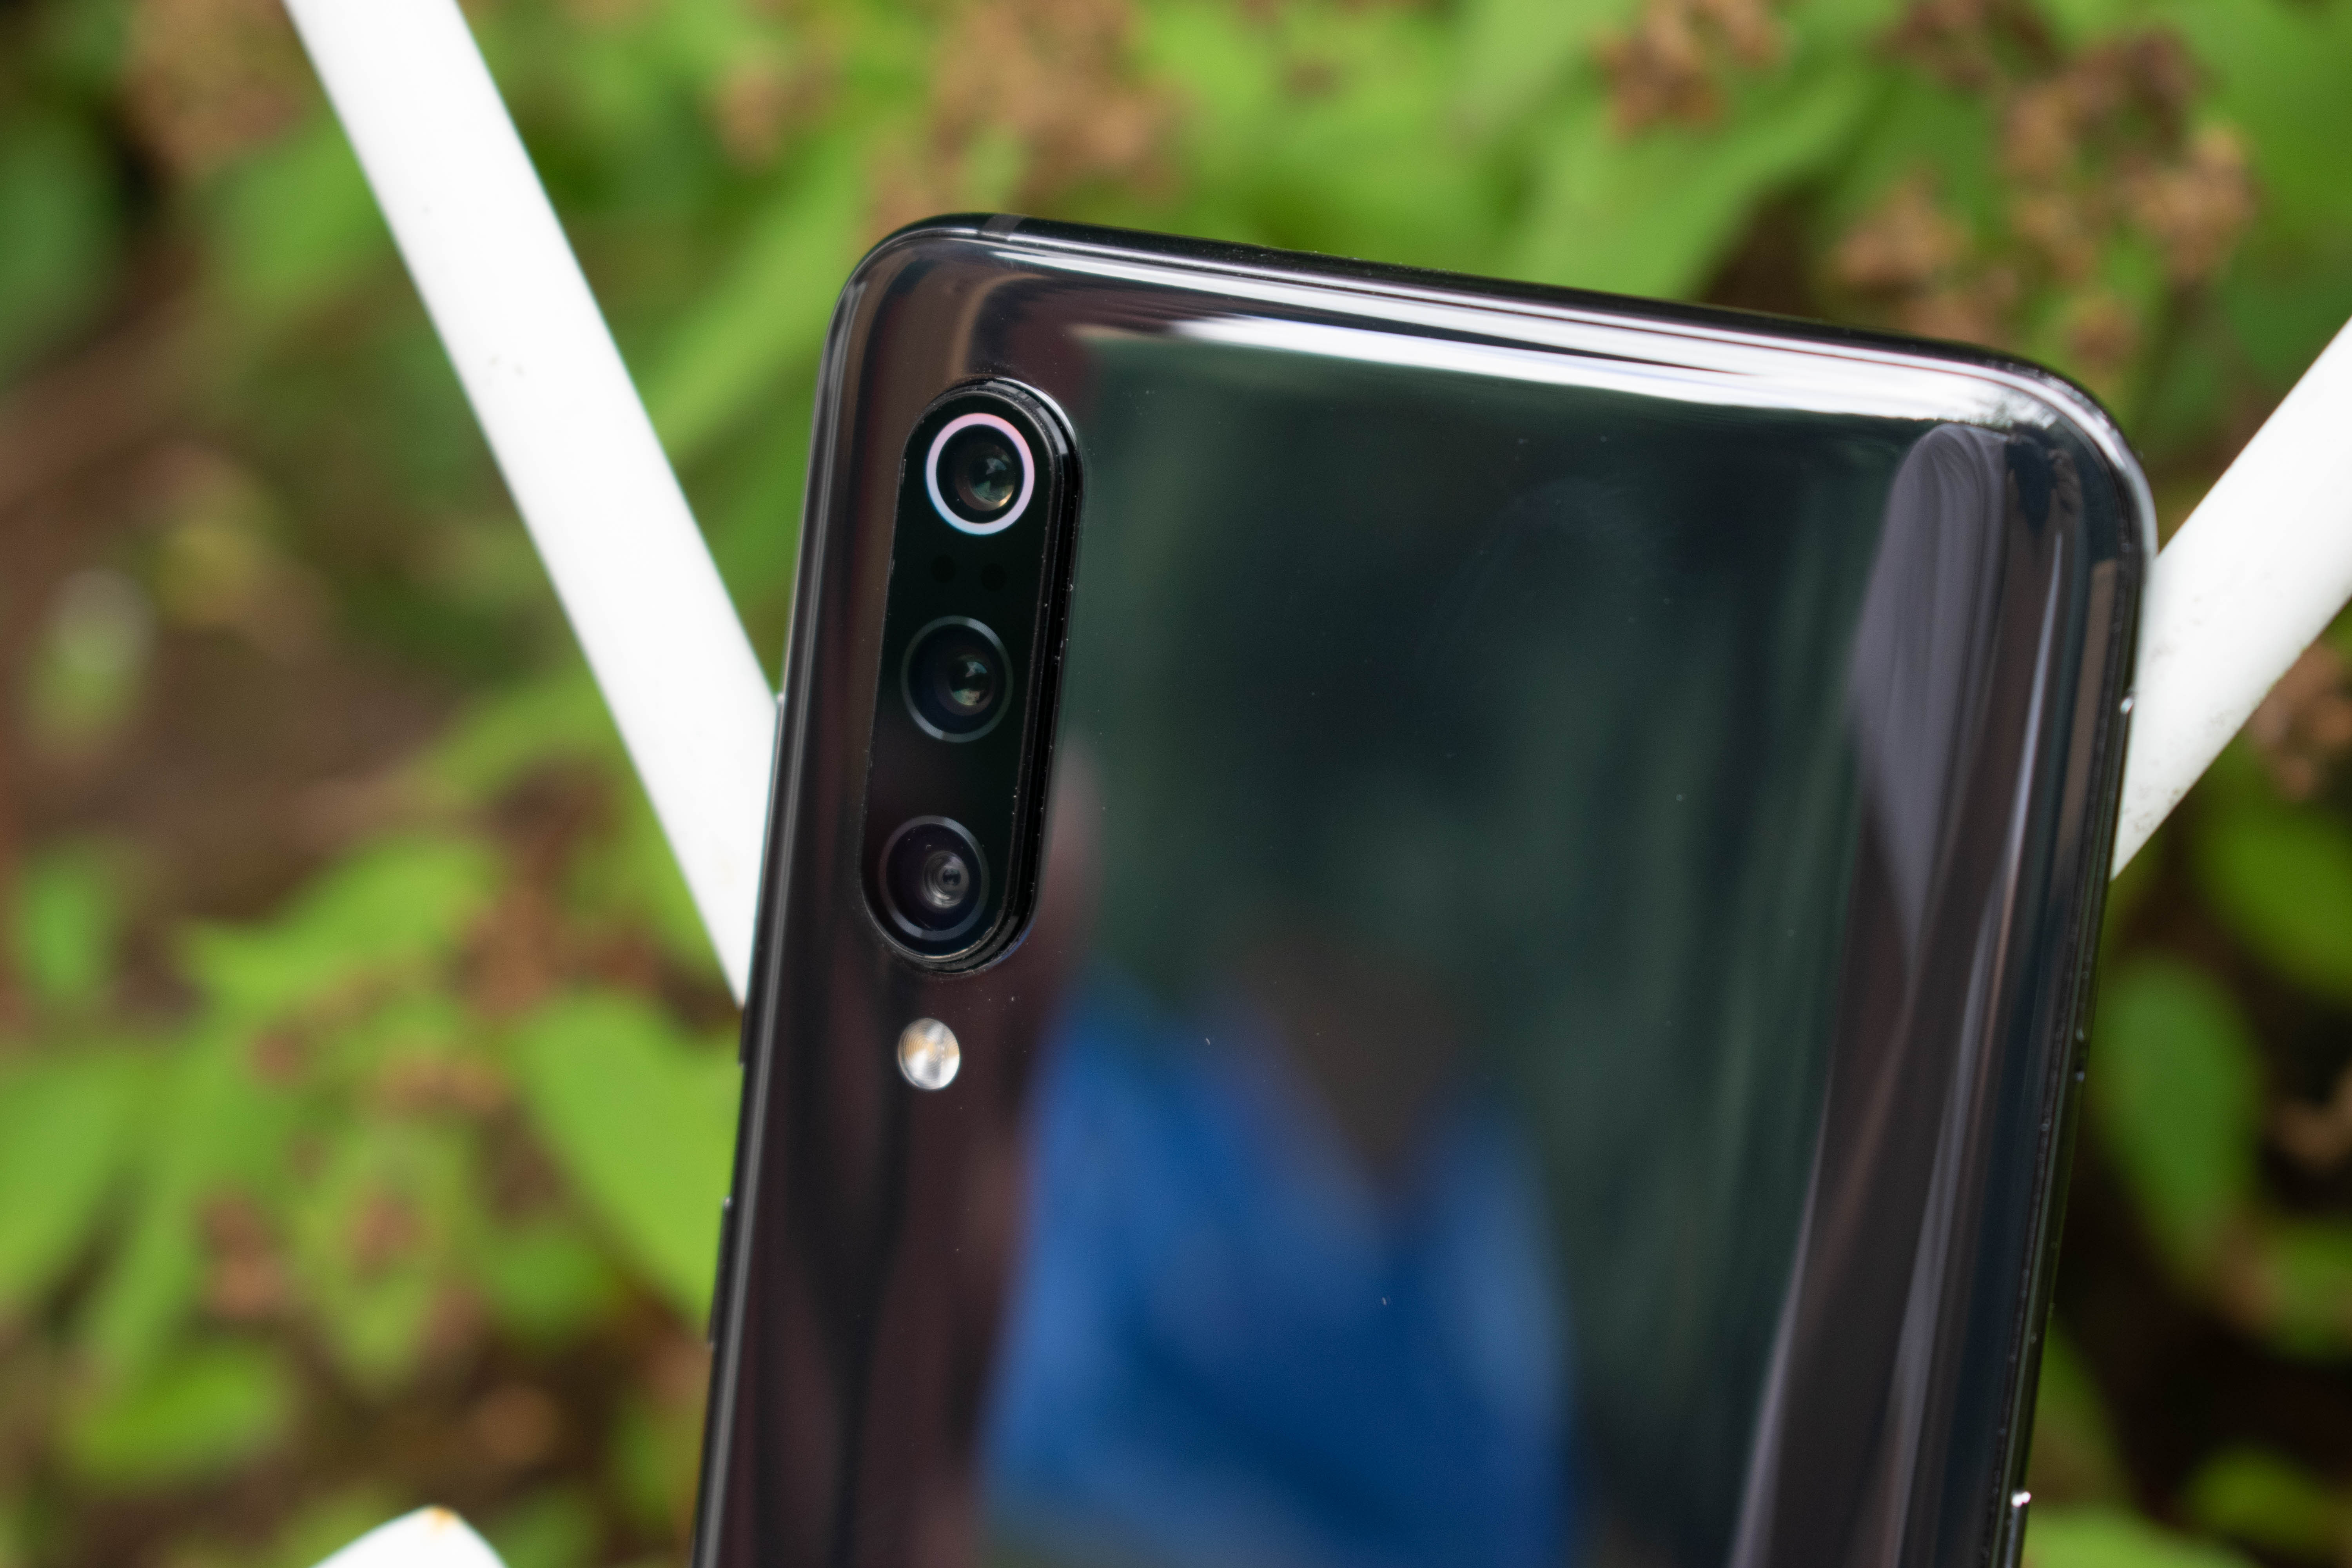 Conclusion & End Remarks - The Xiaomi Mi9 Review: Flagship